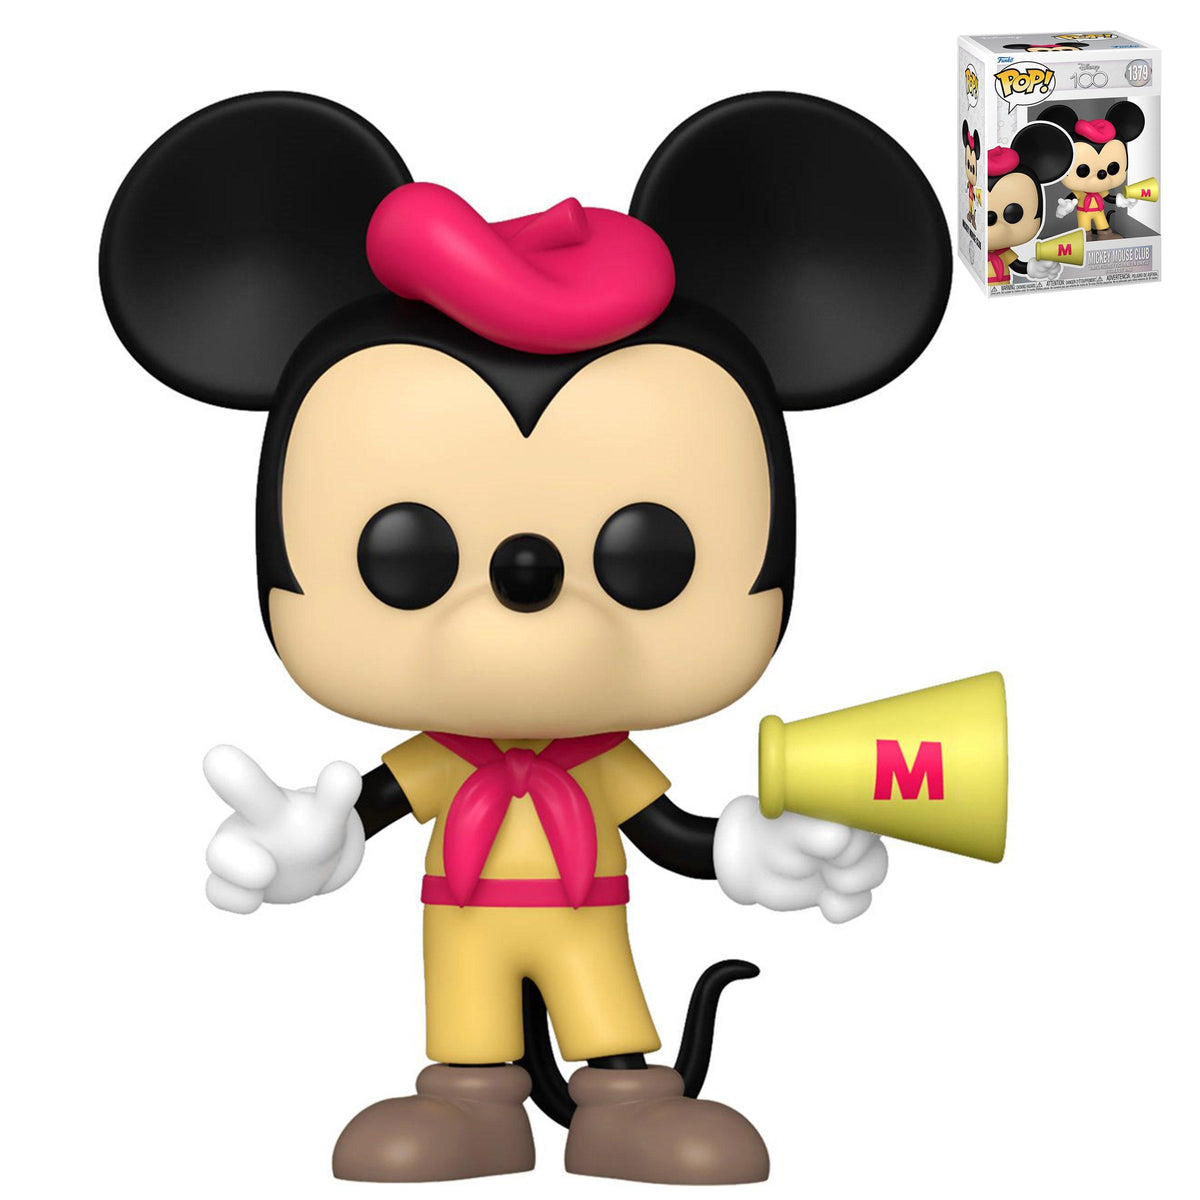 Disney Characters: The Ultimate Disney Character List for Mouseketeers